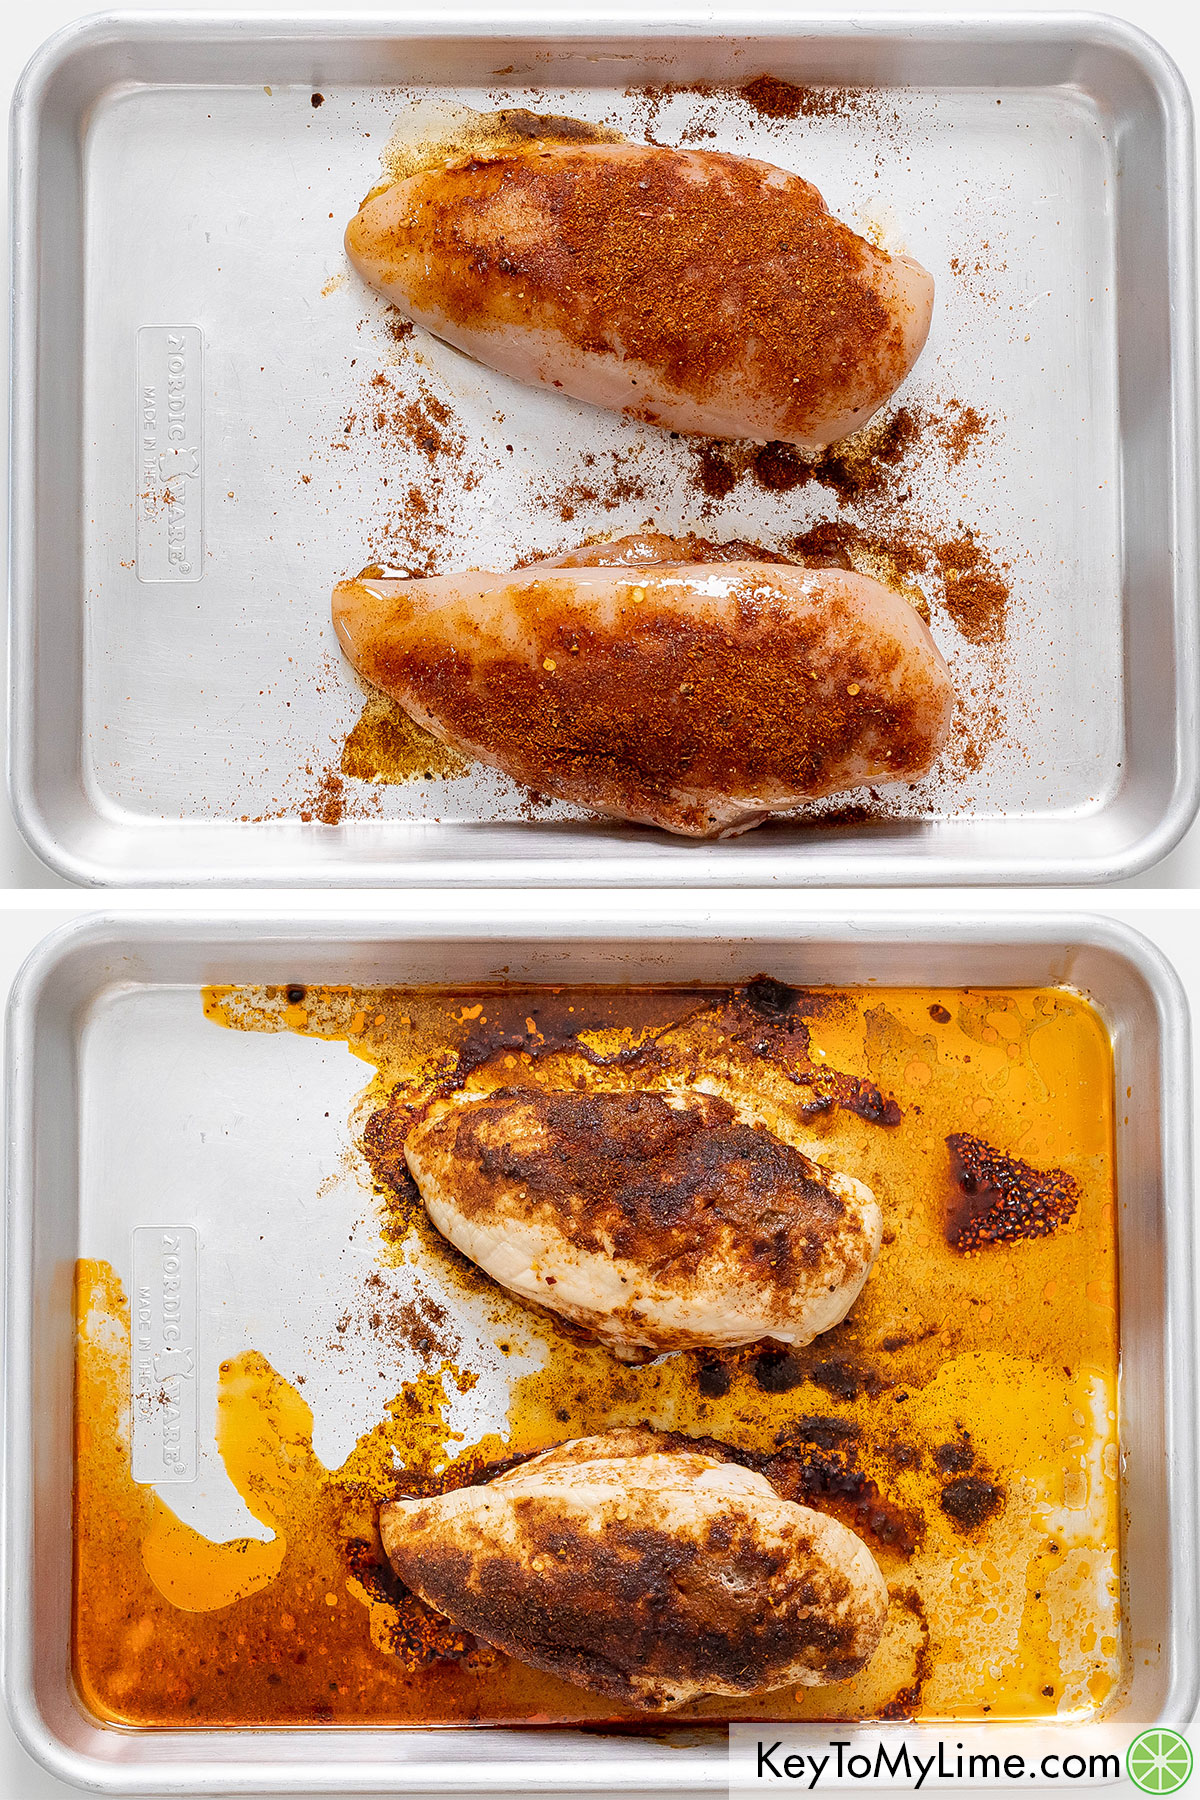 An image of before and after cooking seasoned chicken breast.